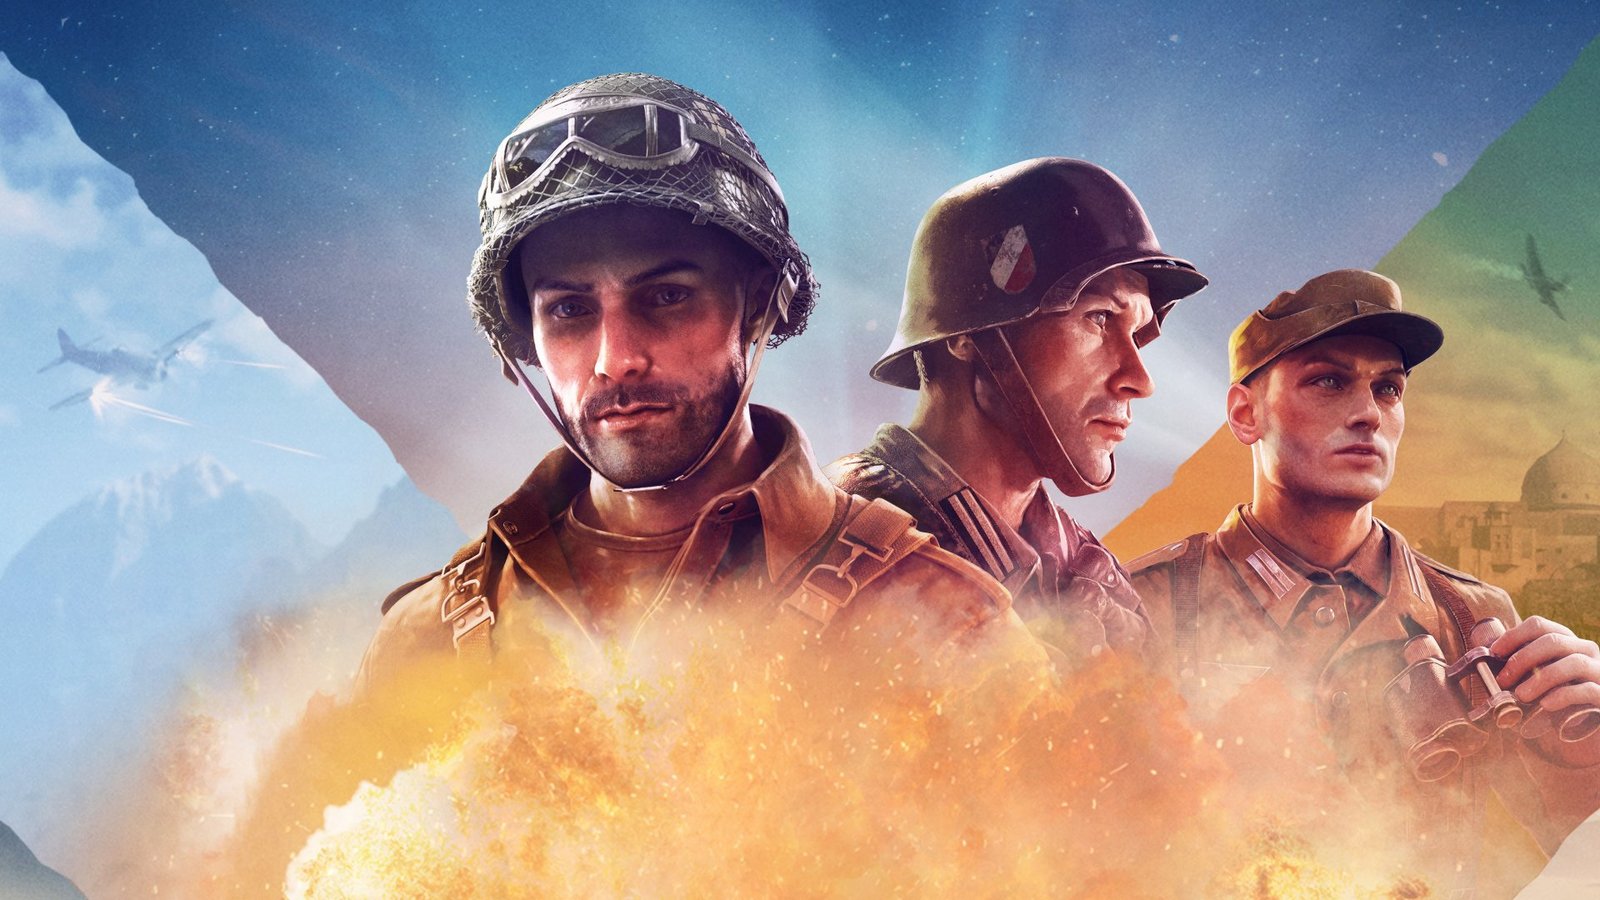 Company of Heroes 3 Full APK Mobile Android Version Crack Game Free Download